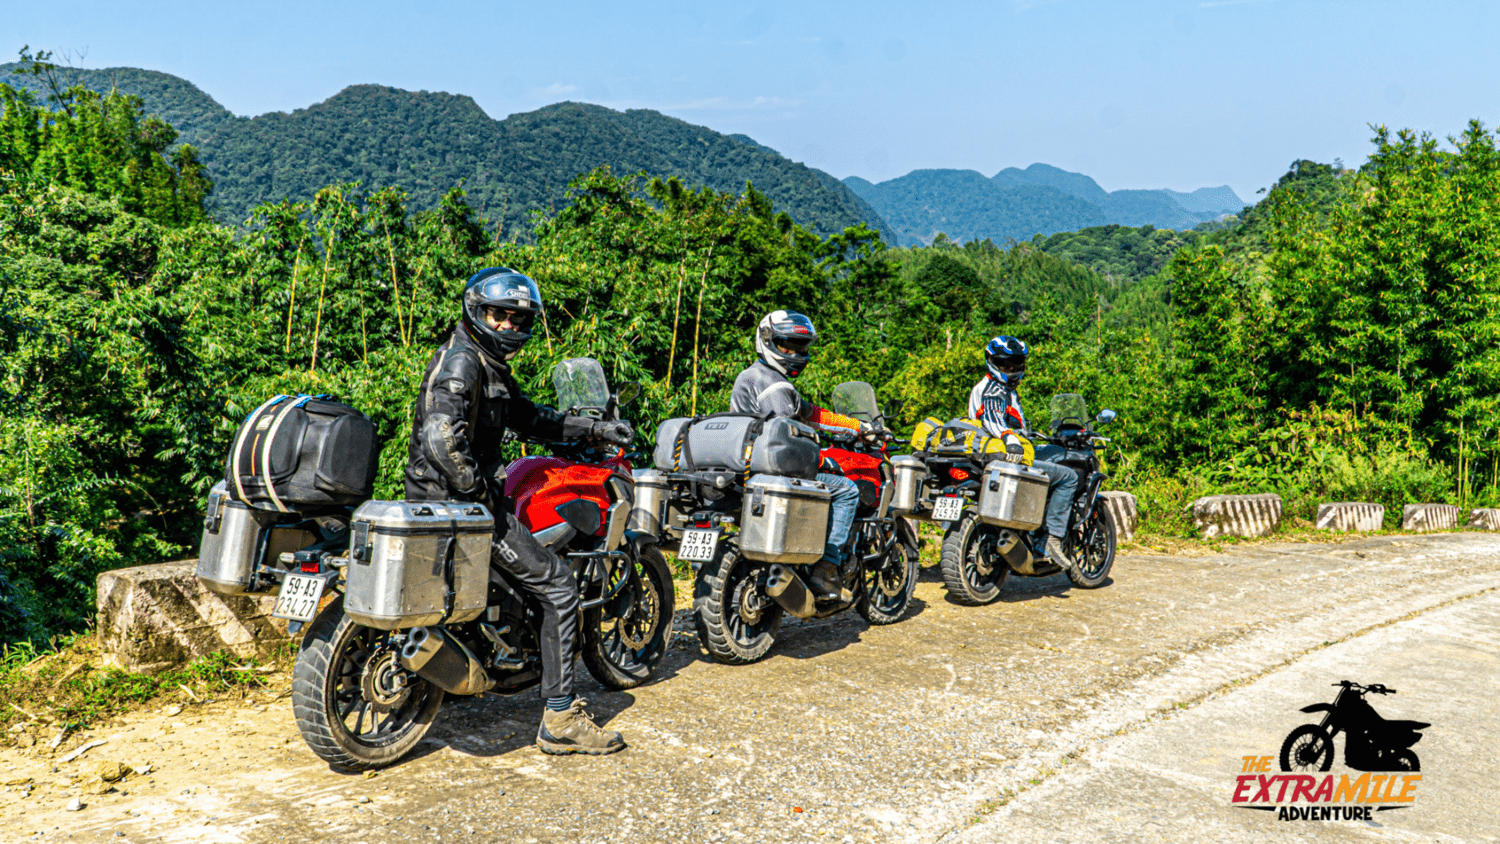 143 - NORTH - Hoa Binh - ready to hit the road with honda cb500x fully equiped for mountain ride with nice jungle view on a dirt road The Extra Mile Adventure Motorbike Tours Vietnam